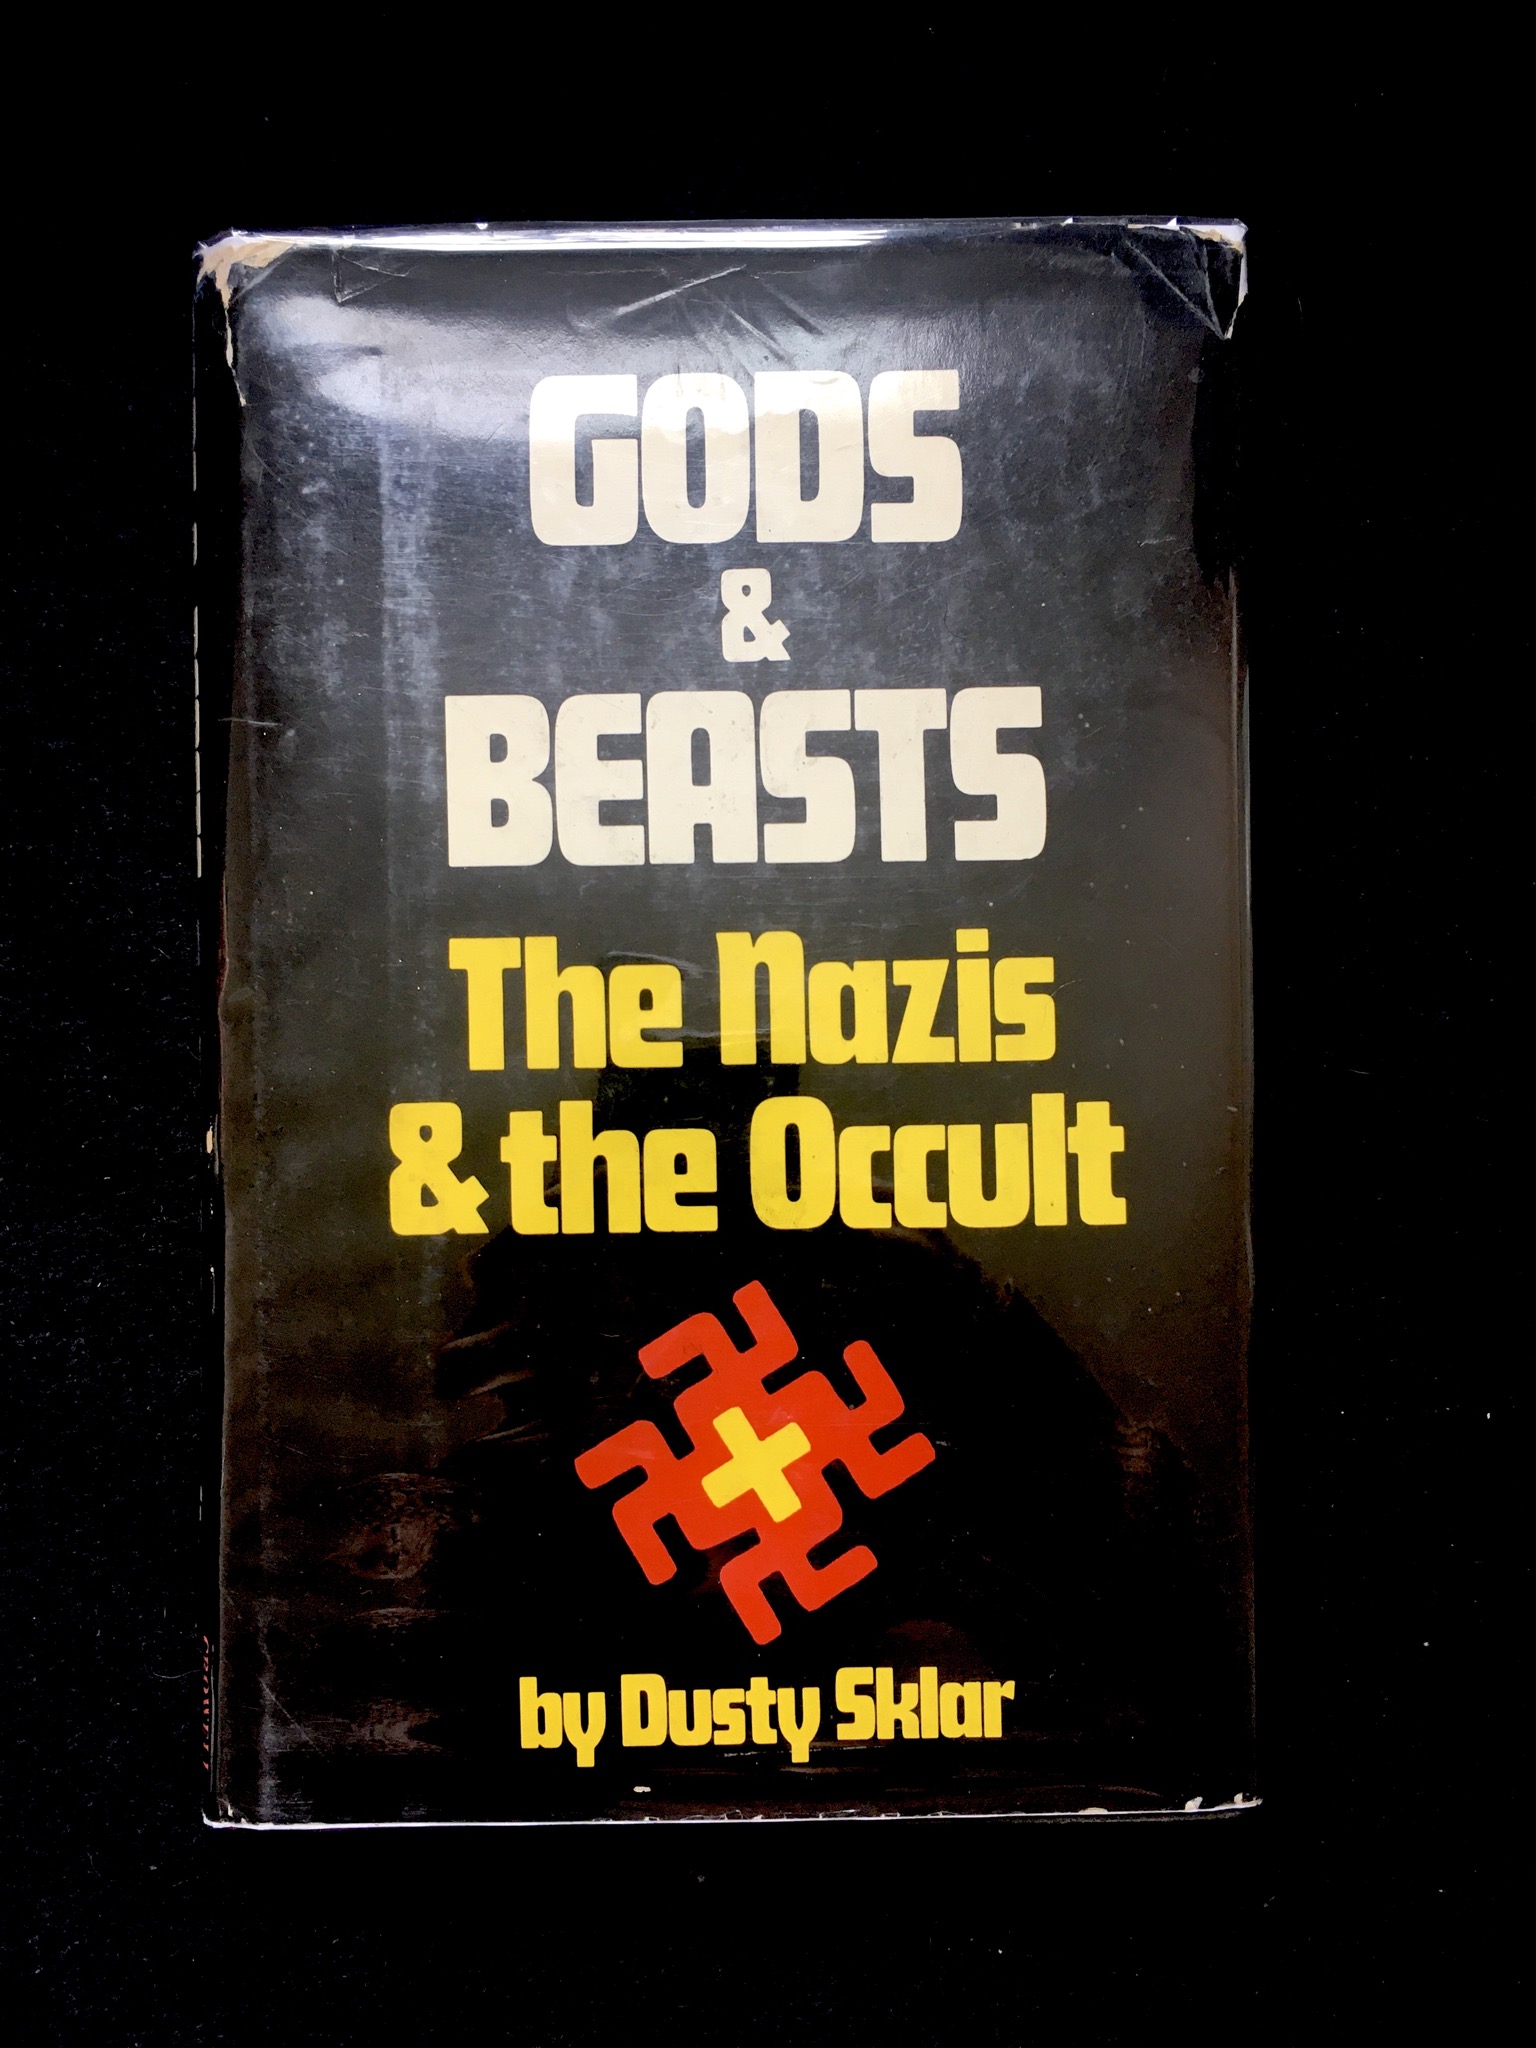 Gods & Beasts The Nazi's & the Occult by Dusty Sklar Signed